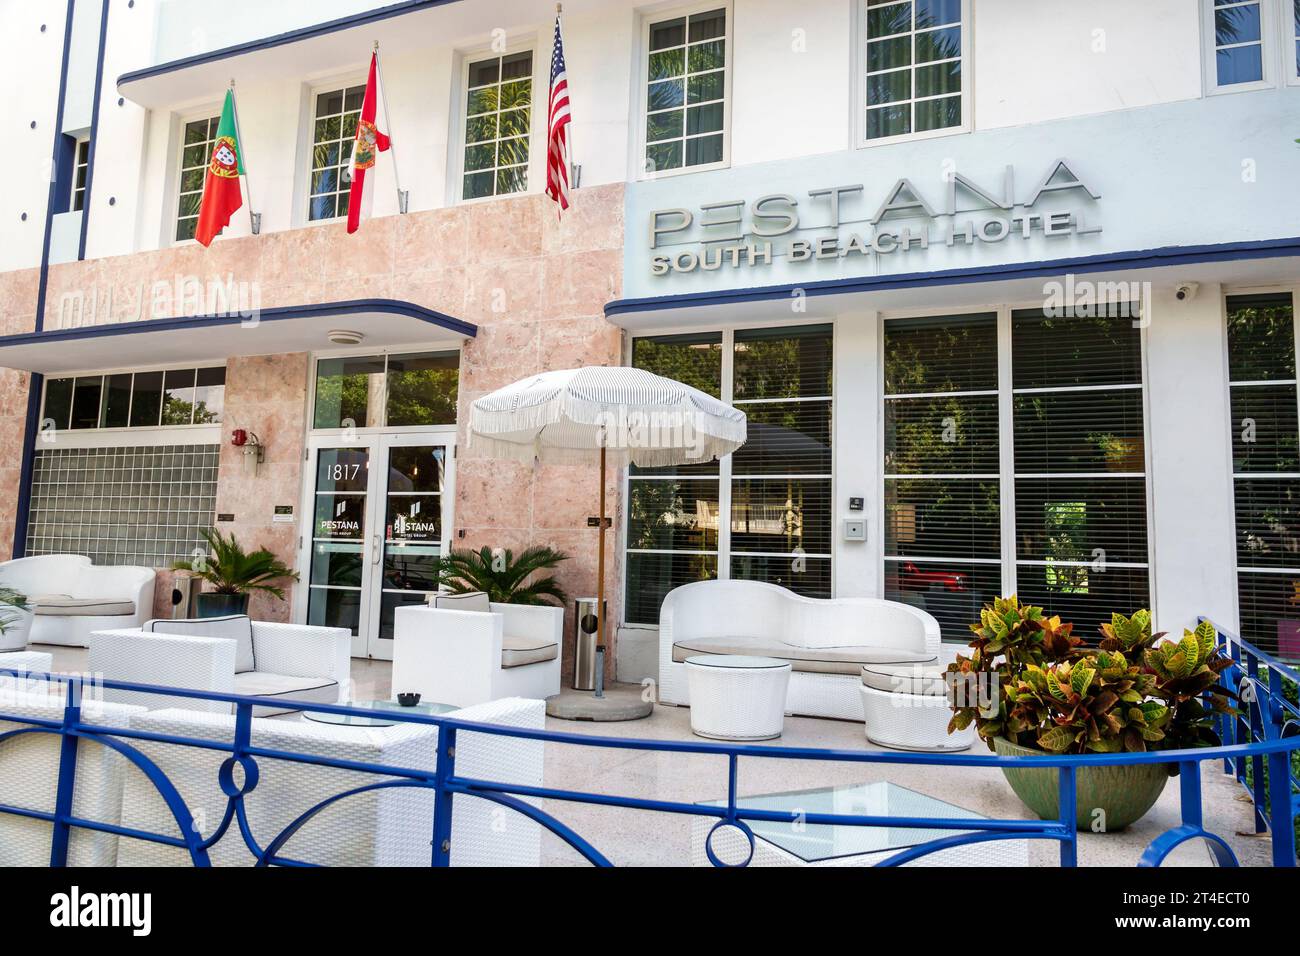 Miami Beach Florida,outside exterior,building front entrance hotel,Pestana South Beach Hotel sign,hotels motels businesses Stock Photo